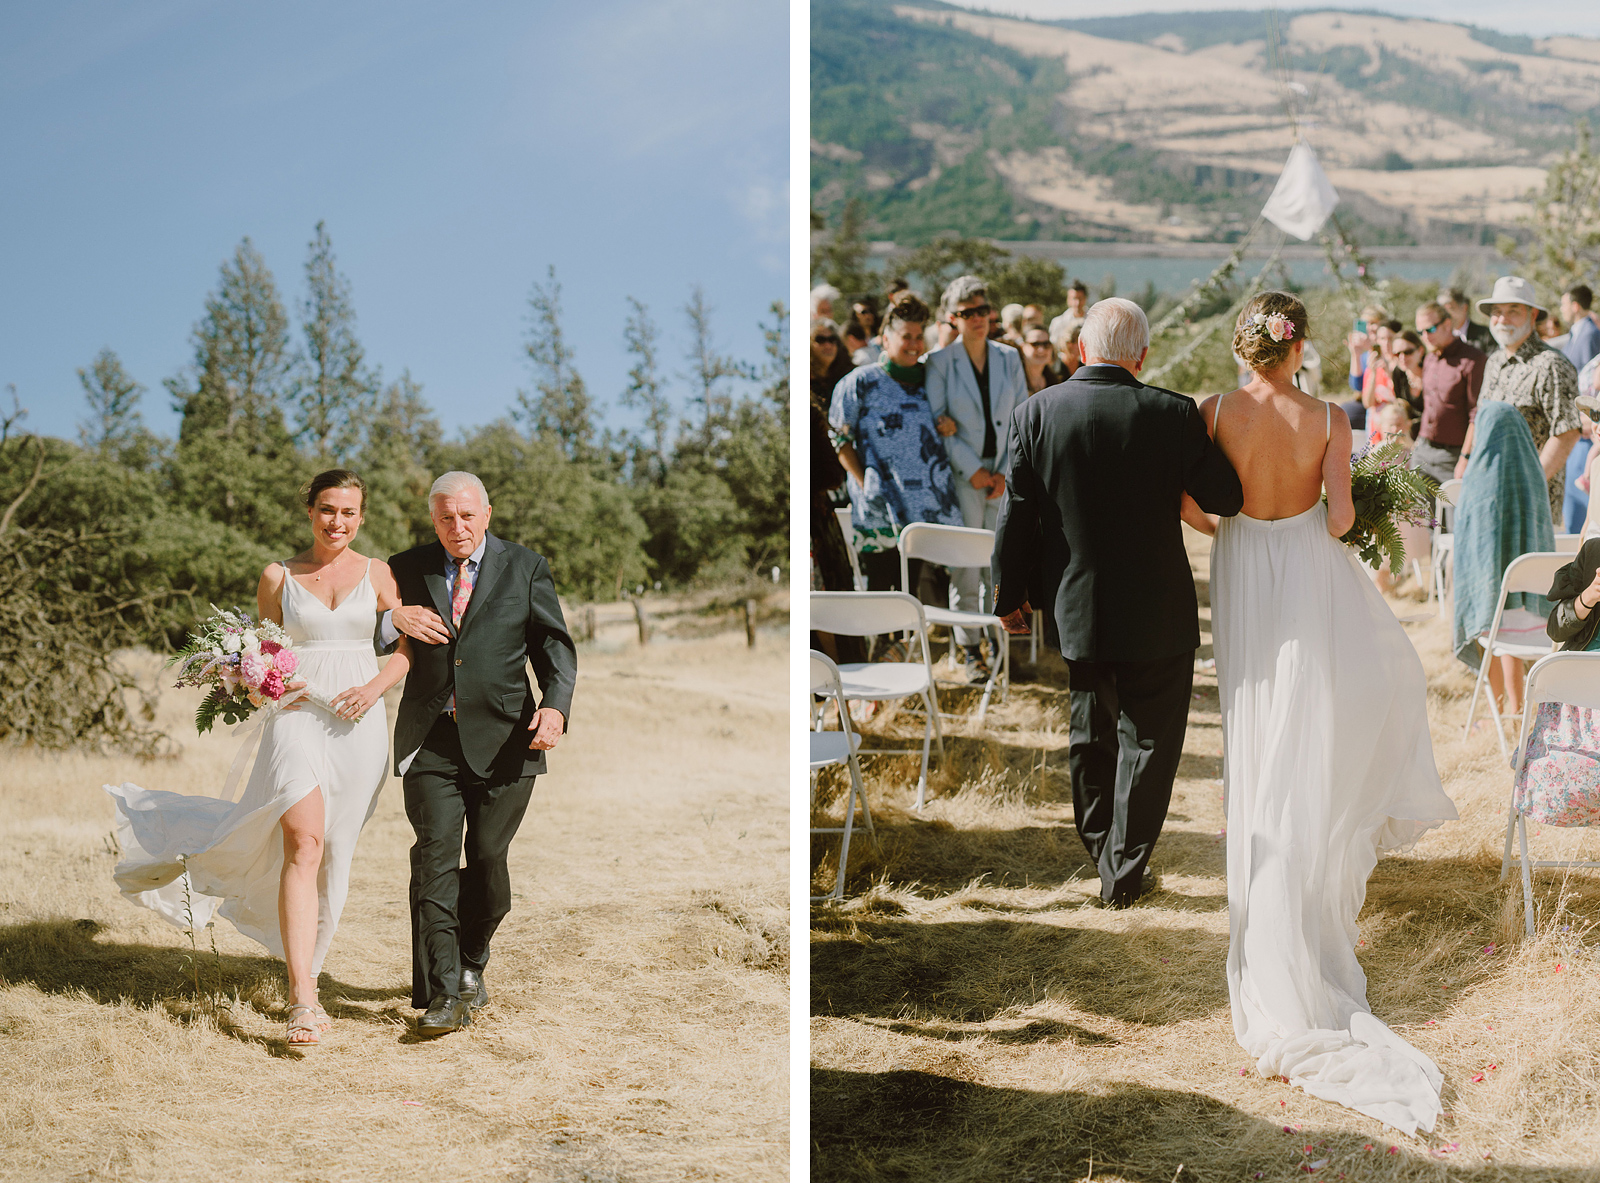 Bride walking down the aisle with her father - Columbia River Gorge wedding in Mosier, OR